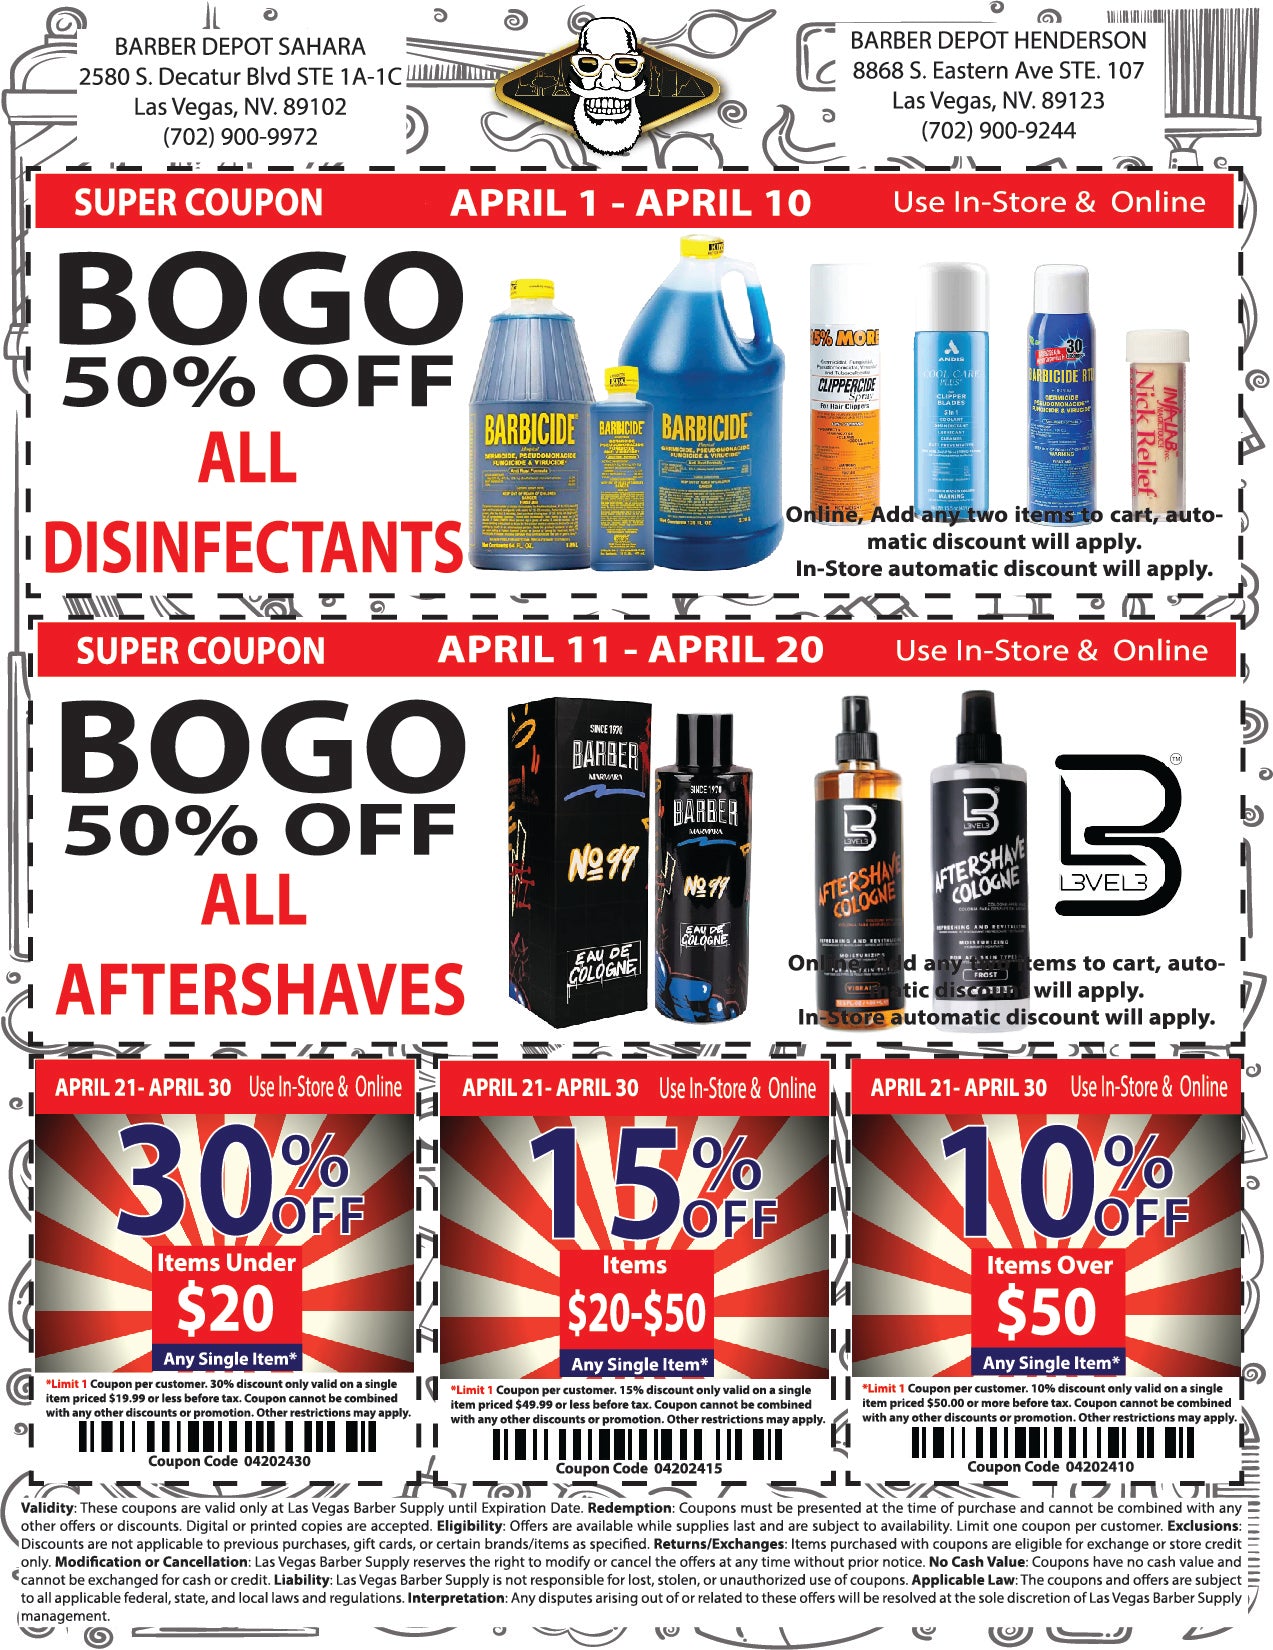 buybarber monthly coupons save on barber supplies